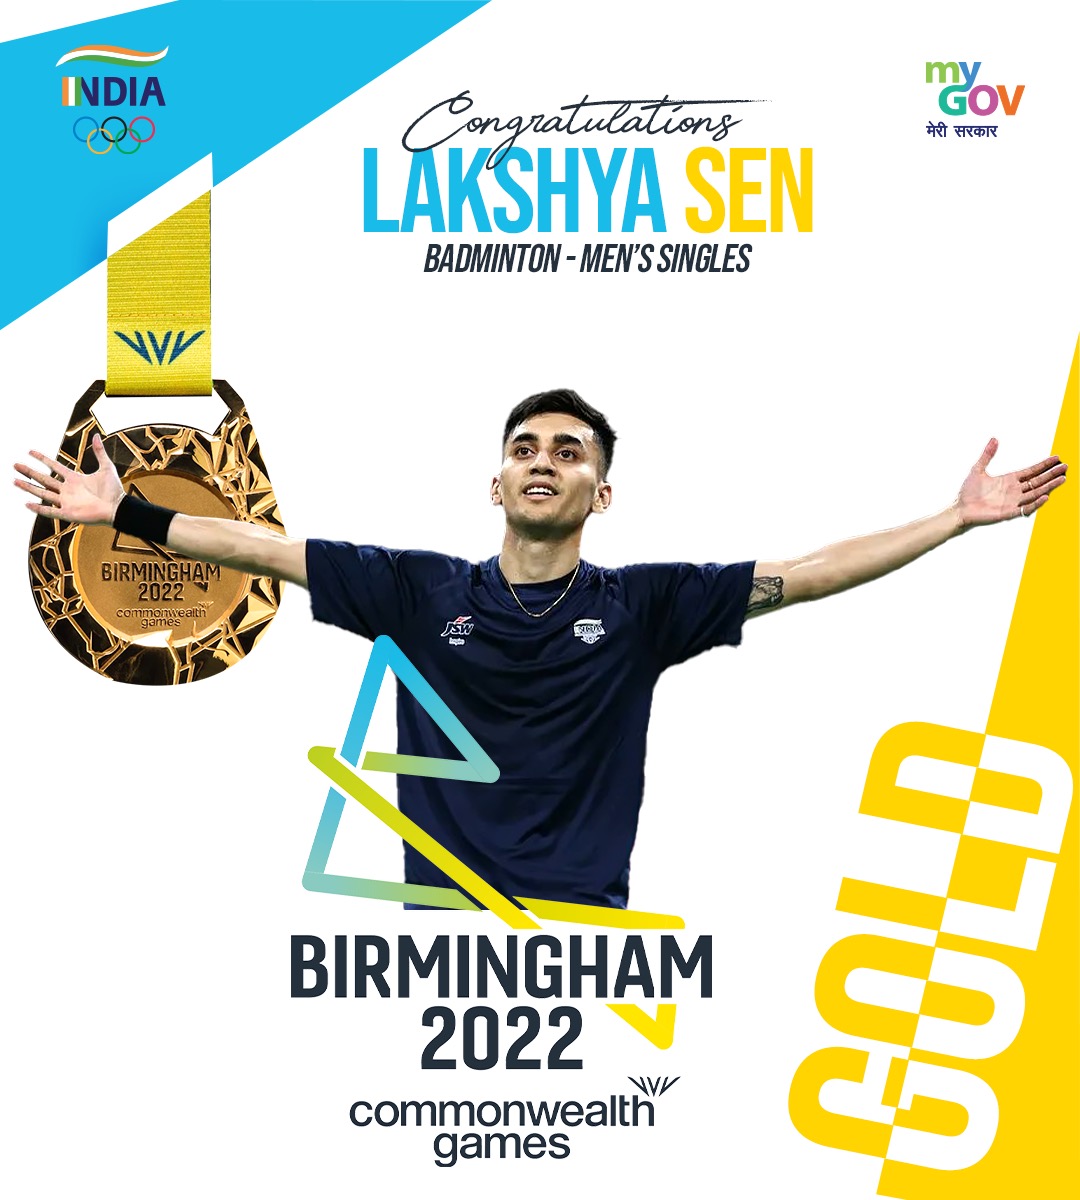 SEN - SATIONAL 🥇 clinched by @lakshya_sen in an absolute classic at Birmingham!

In his debut at #CWG2022 🏸 , the 20 year-old boy records the 20th GOLD ⭐ for India 🇮🇳

LAKSHYA Achieved❤️
#YuvaShakti
#CheerForIndia